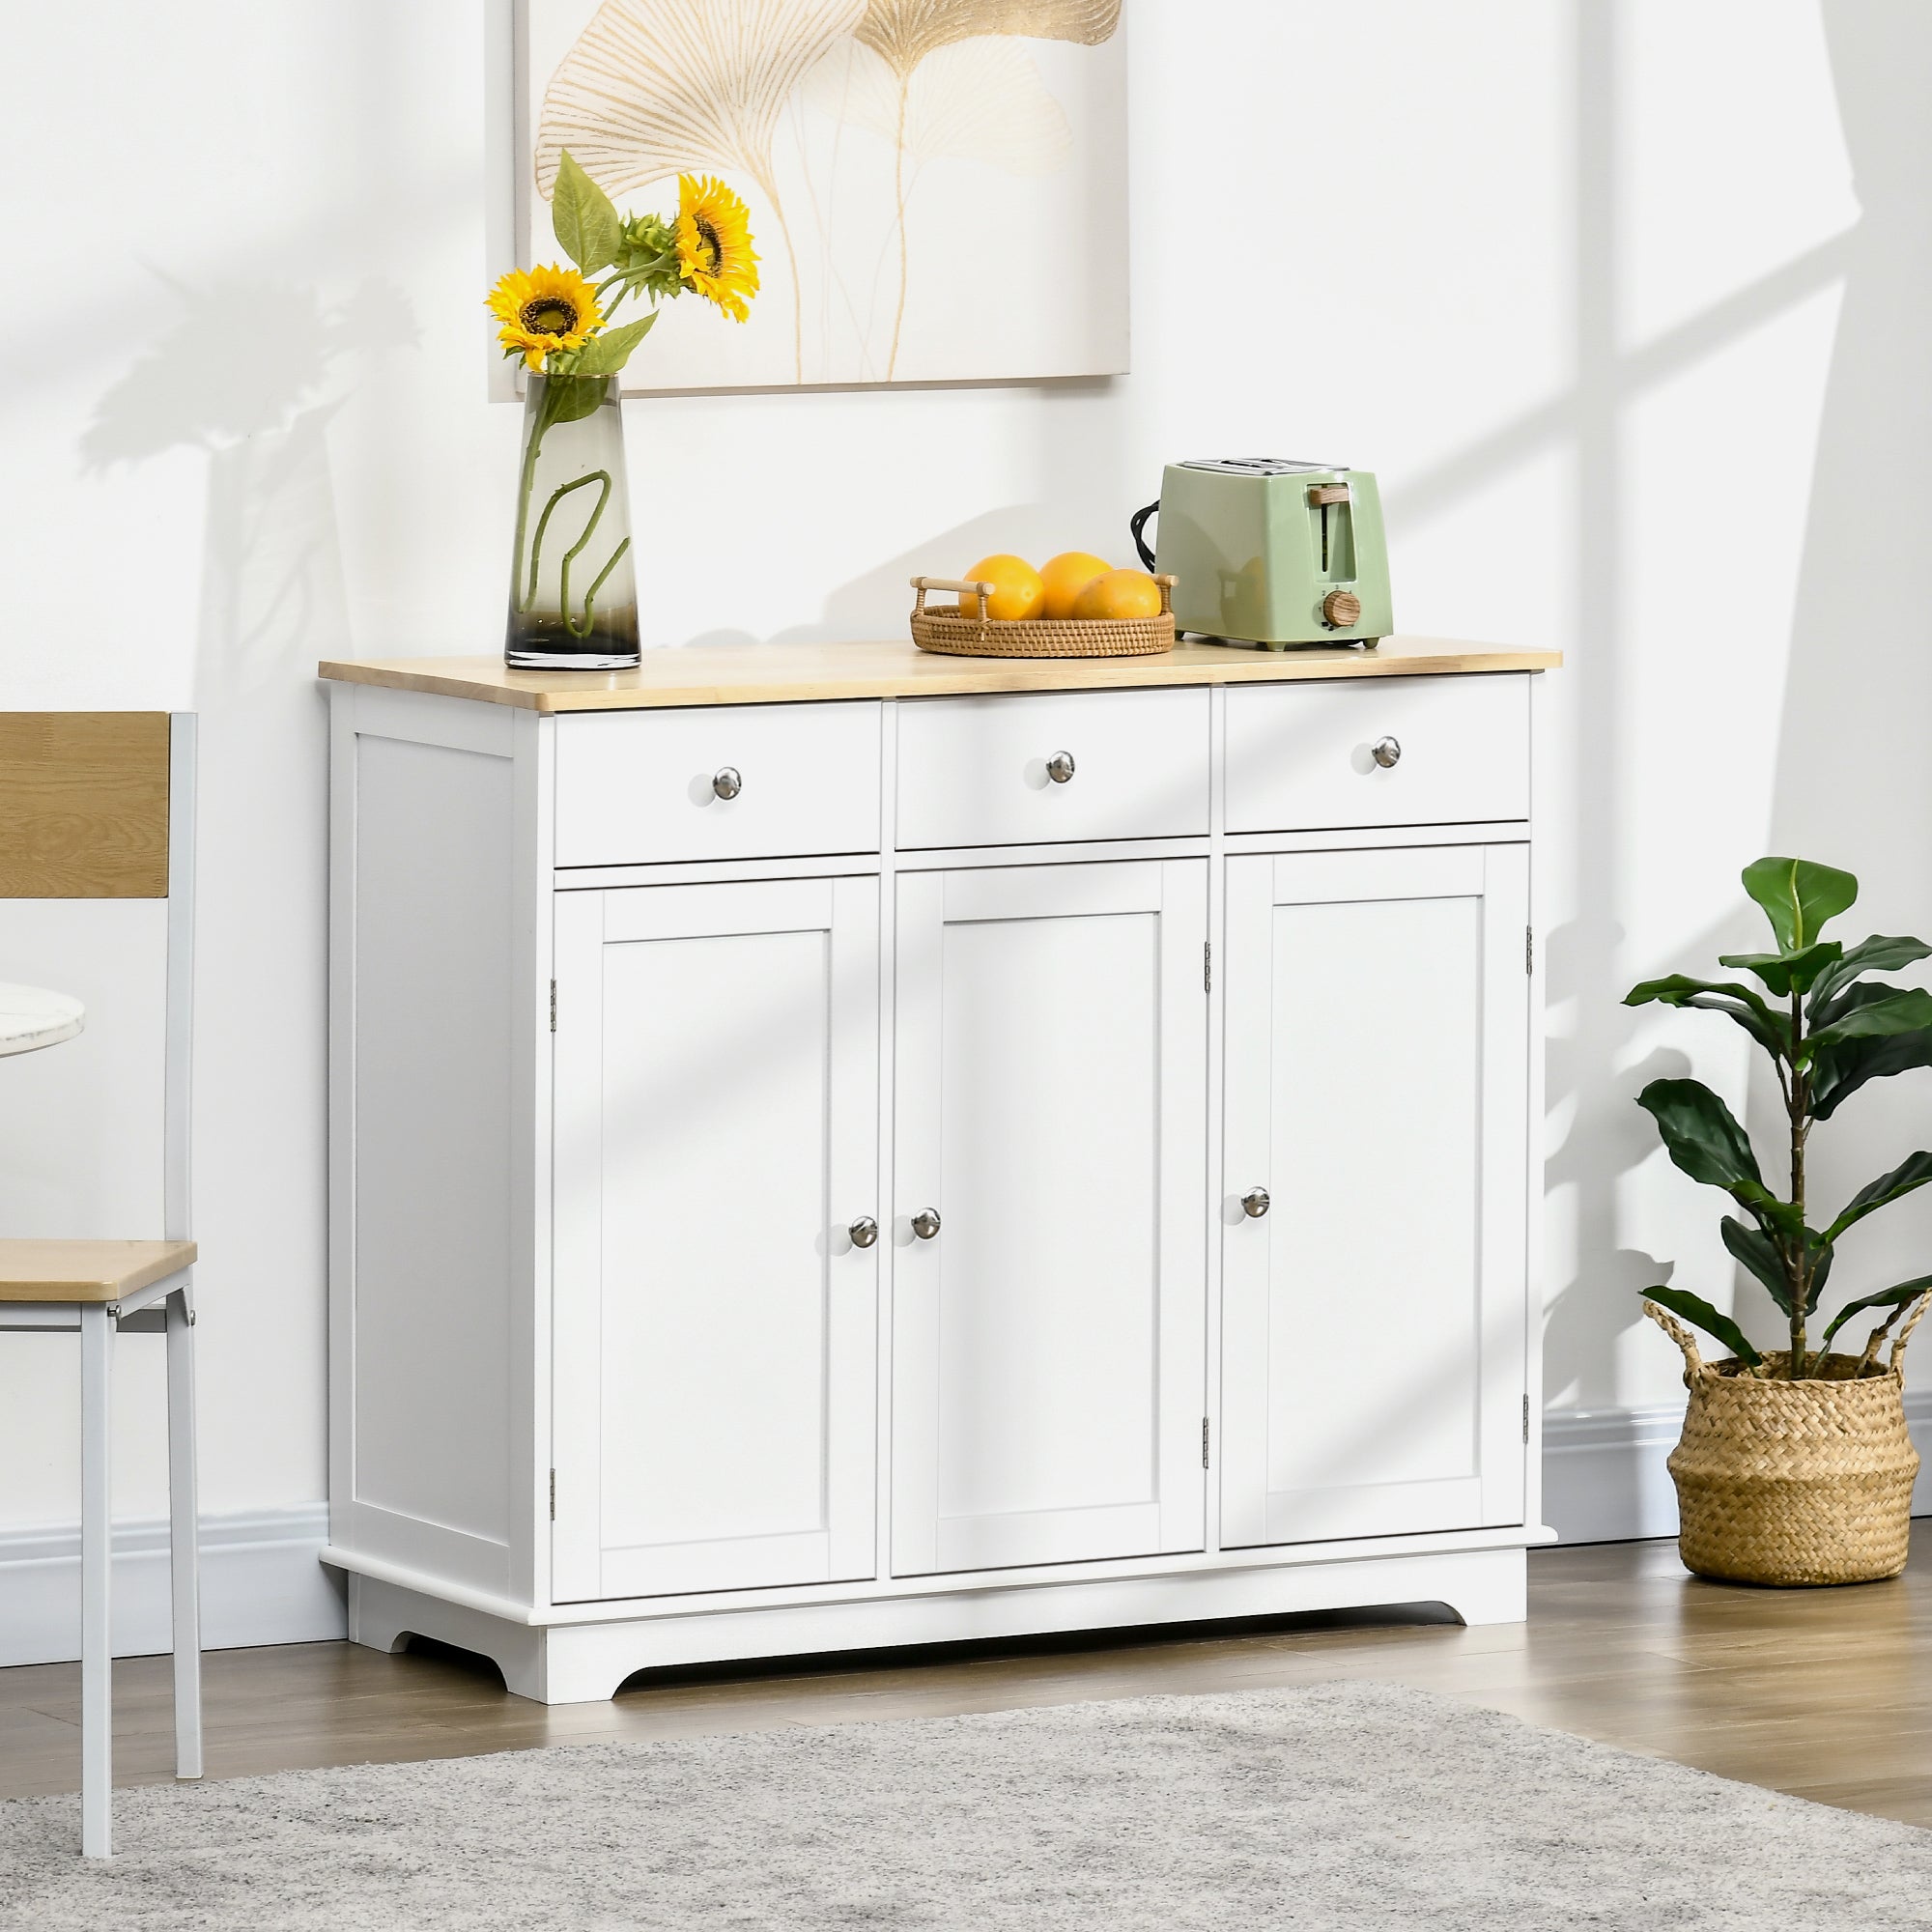 HOMCOM Modern Sideboard with Rubberwood Top, Buffet Cabinet with Storage Cabinets, Drawers and Adjustable Shelves for Living Room, Kitchen, White